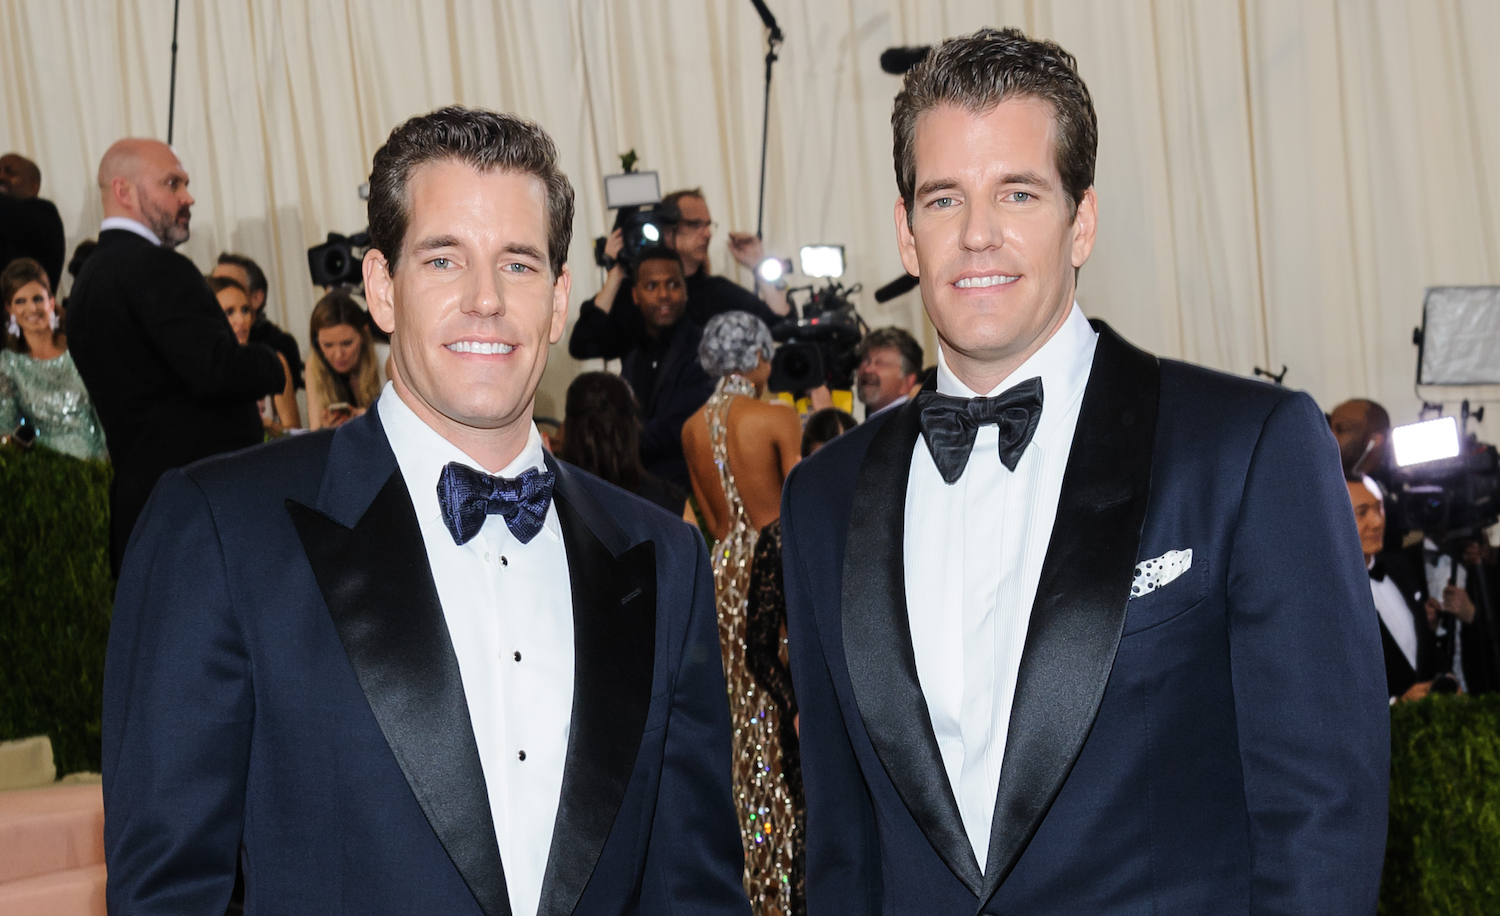 Why the Winklevoss Brothers Are Still Waiting for a Bitcoin ETF